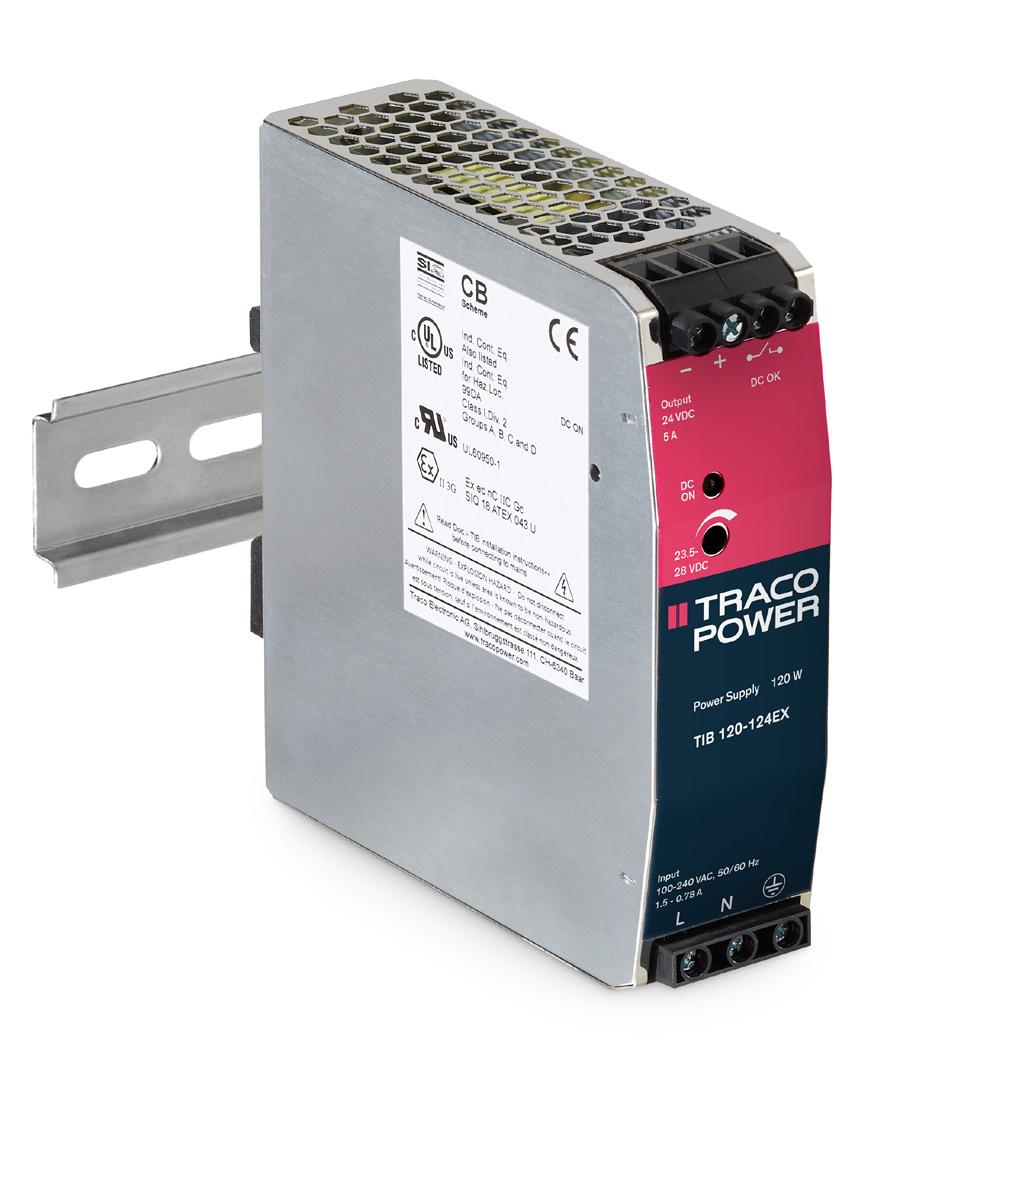 Industrial Power Supplies UL Hazloc Class I, division 2 approval and ATEX certification SEMI F47 compliant for voltage sag immunity Rugged metal case with optional side-mounting Very high efficiency